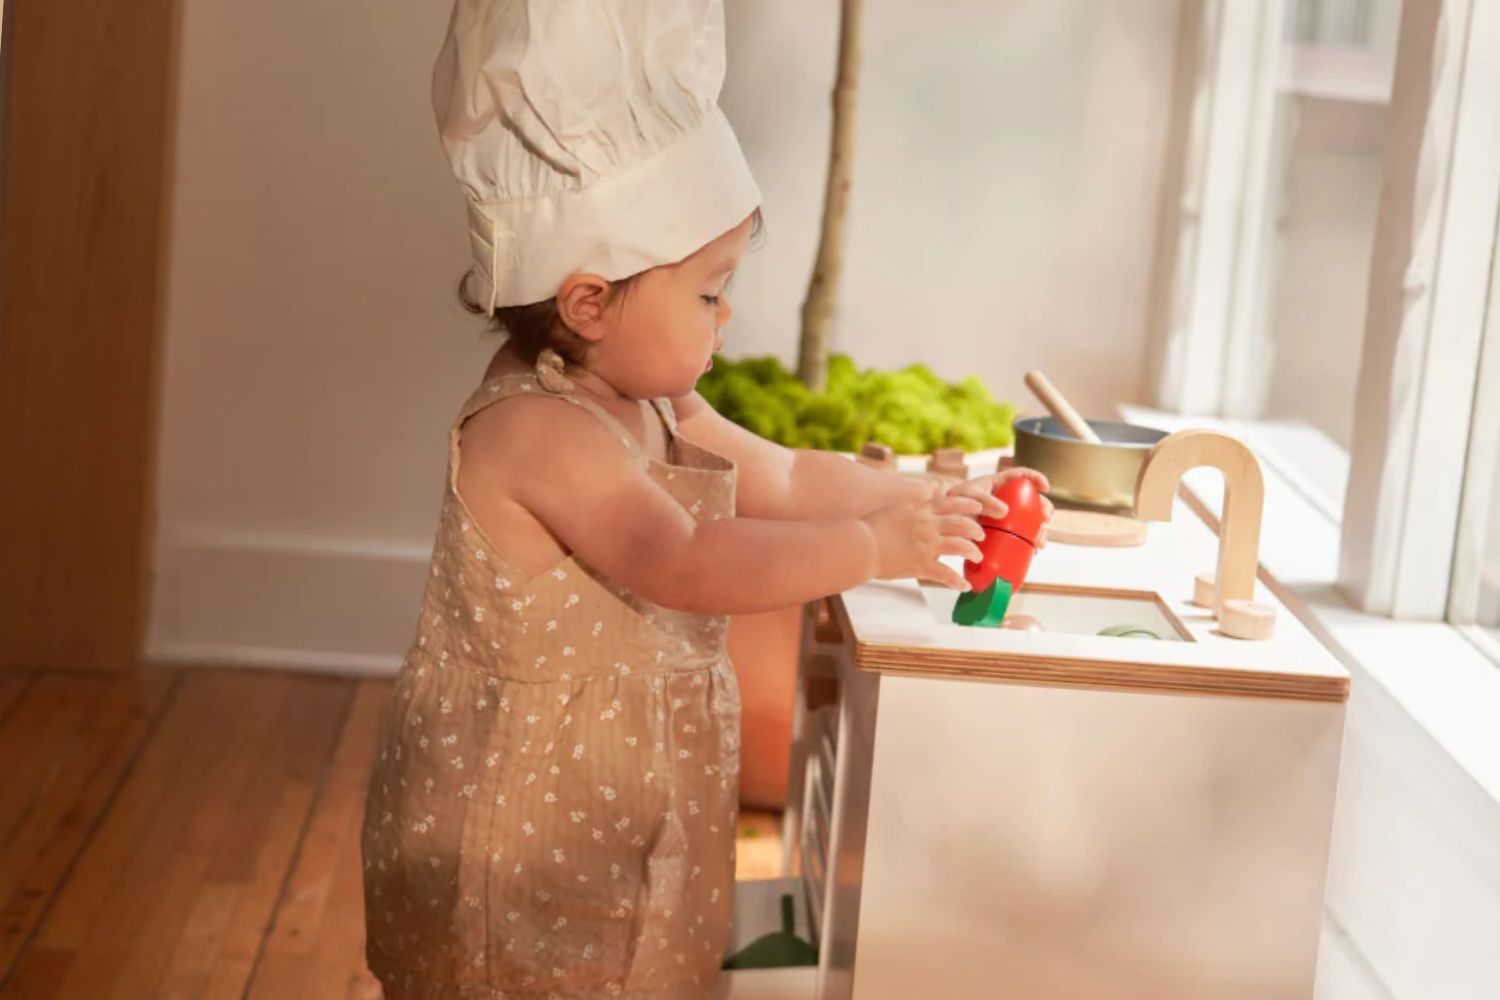 Age-appropriate Tasks to Keep a Toy Kitchen Interesting